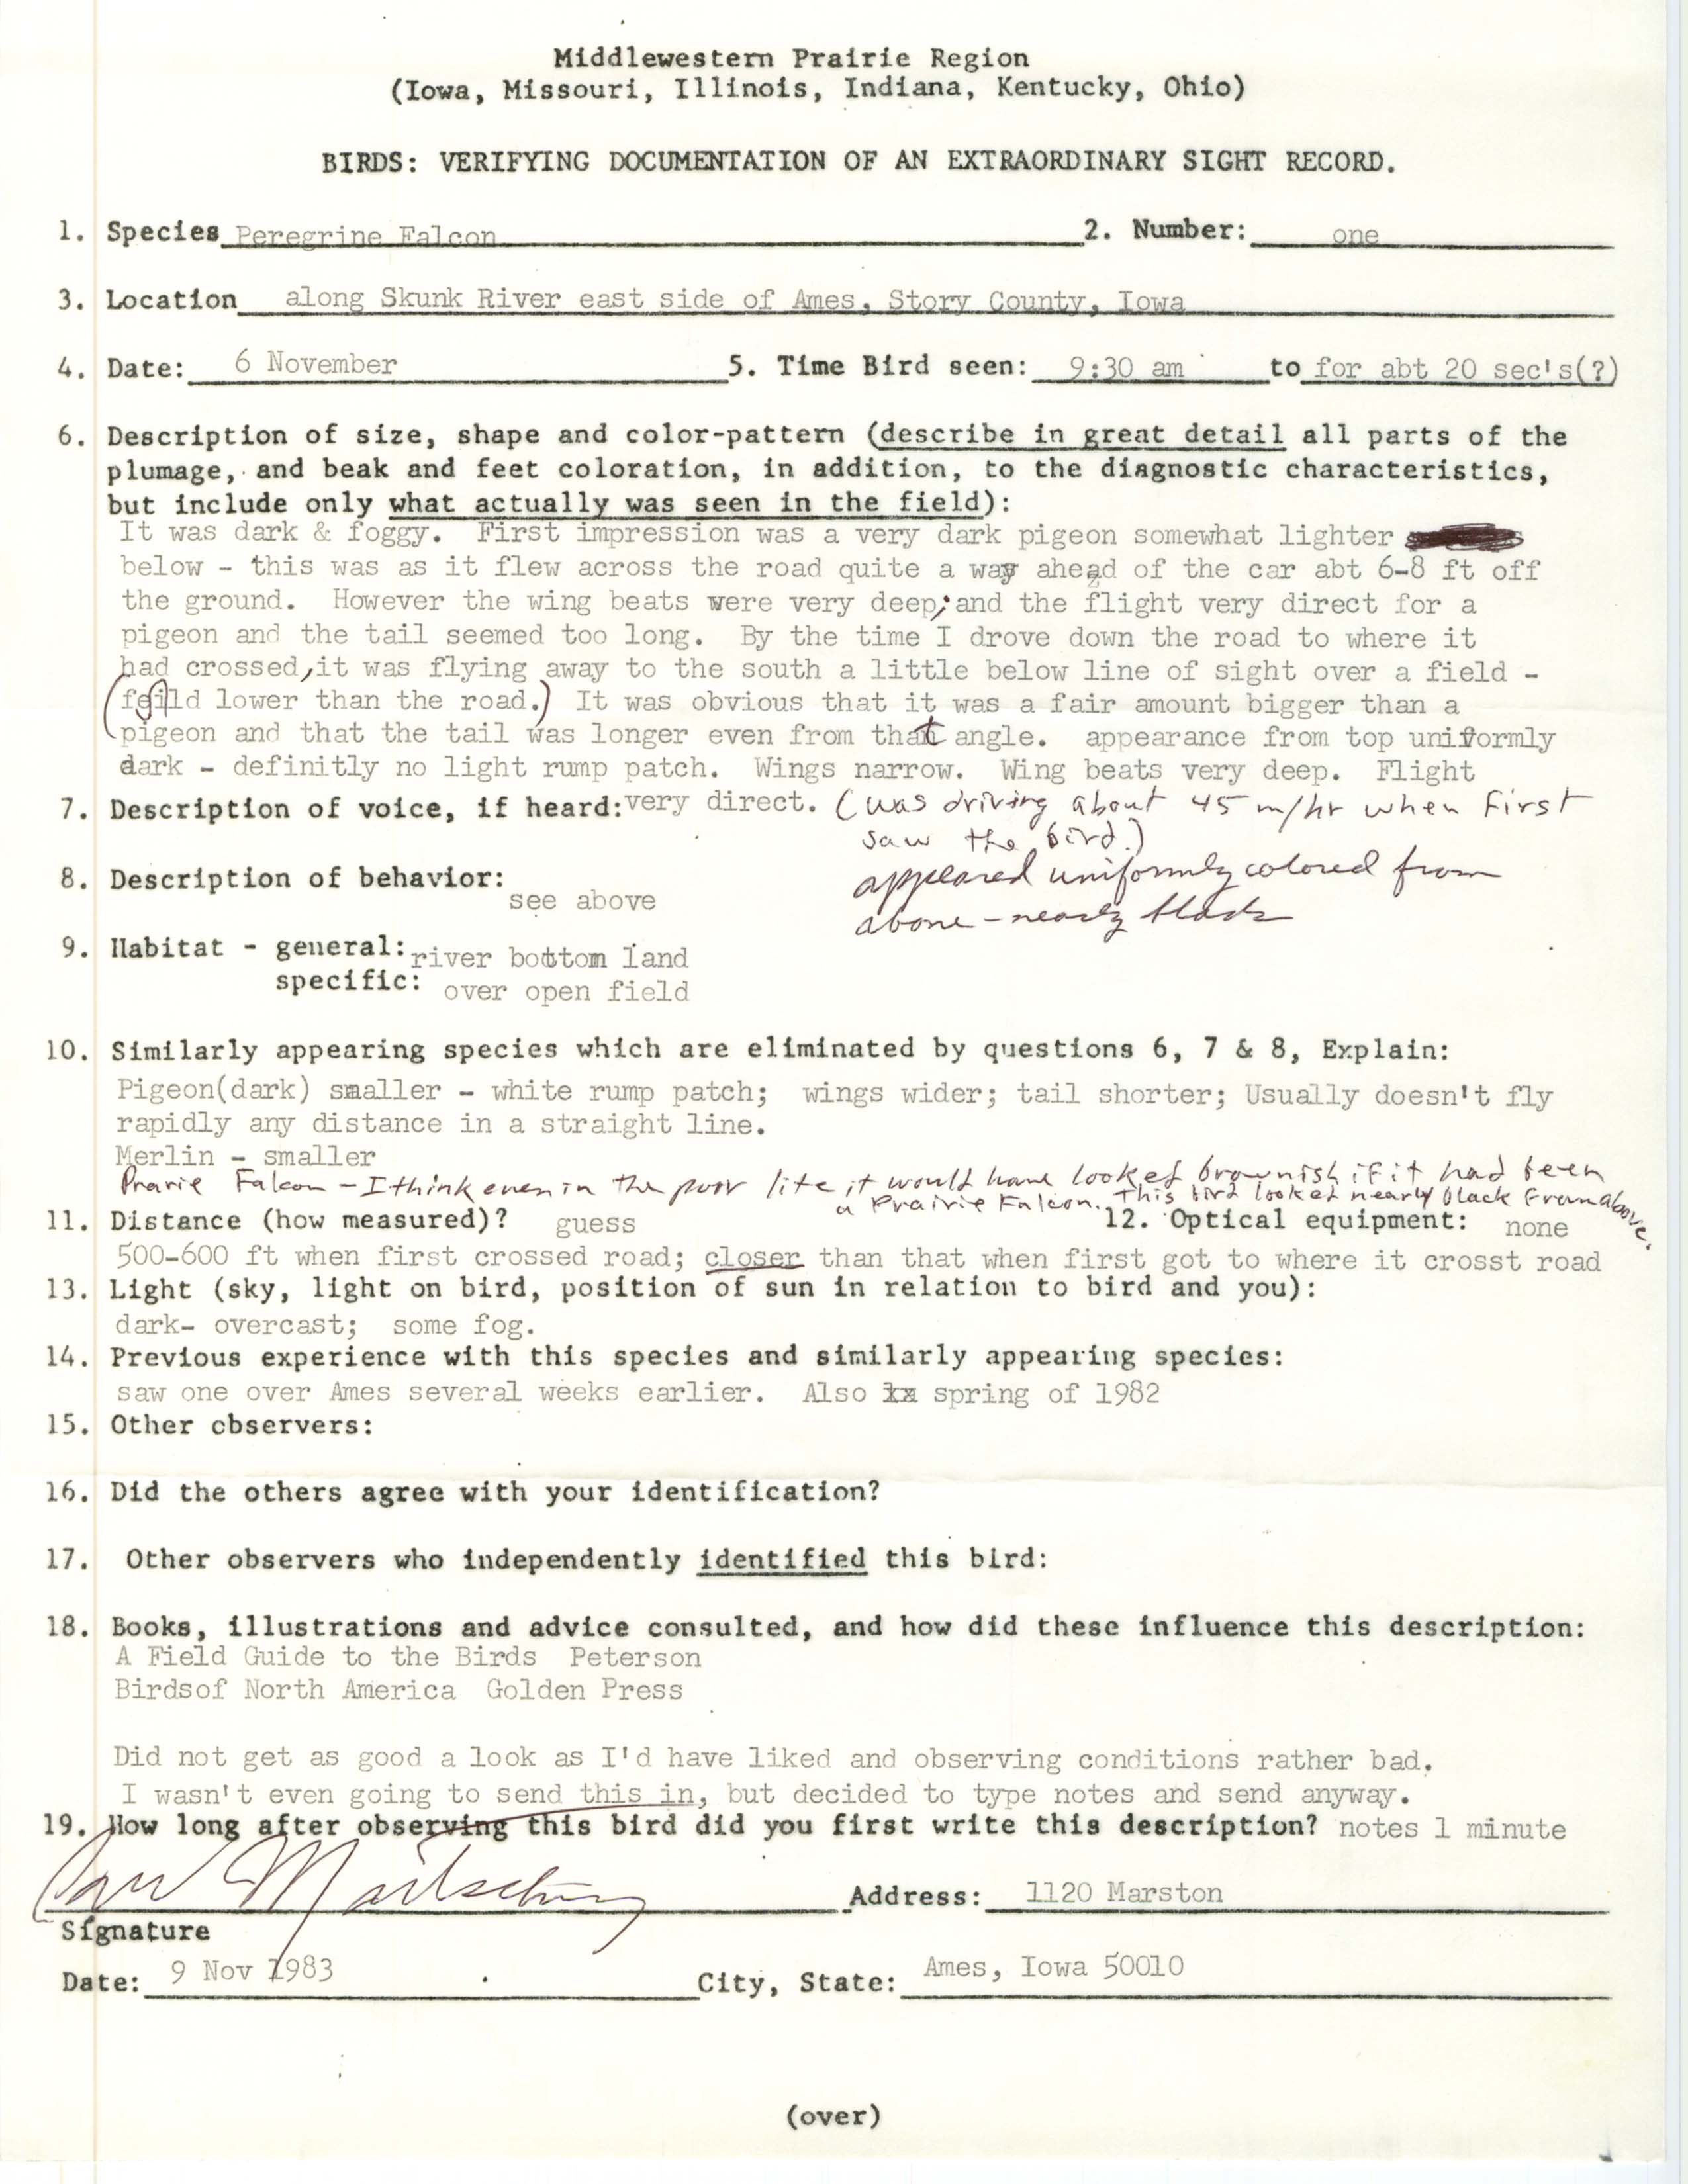 Rare bird documentation form for Peregrine Falcon along the Skunk River in Ames, 1983